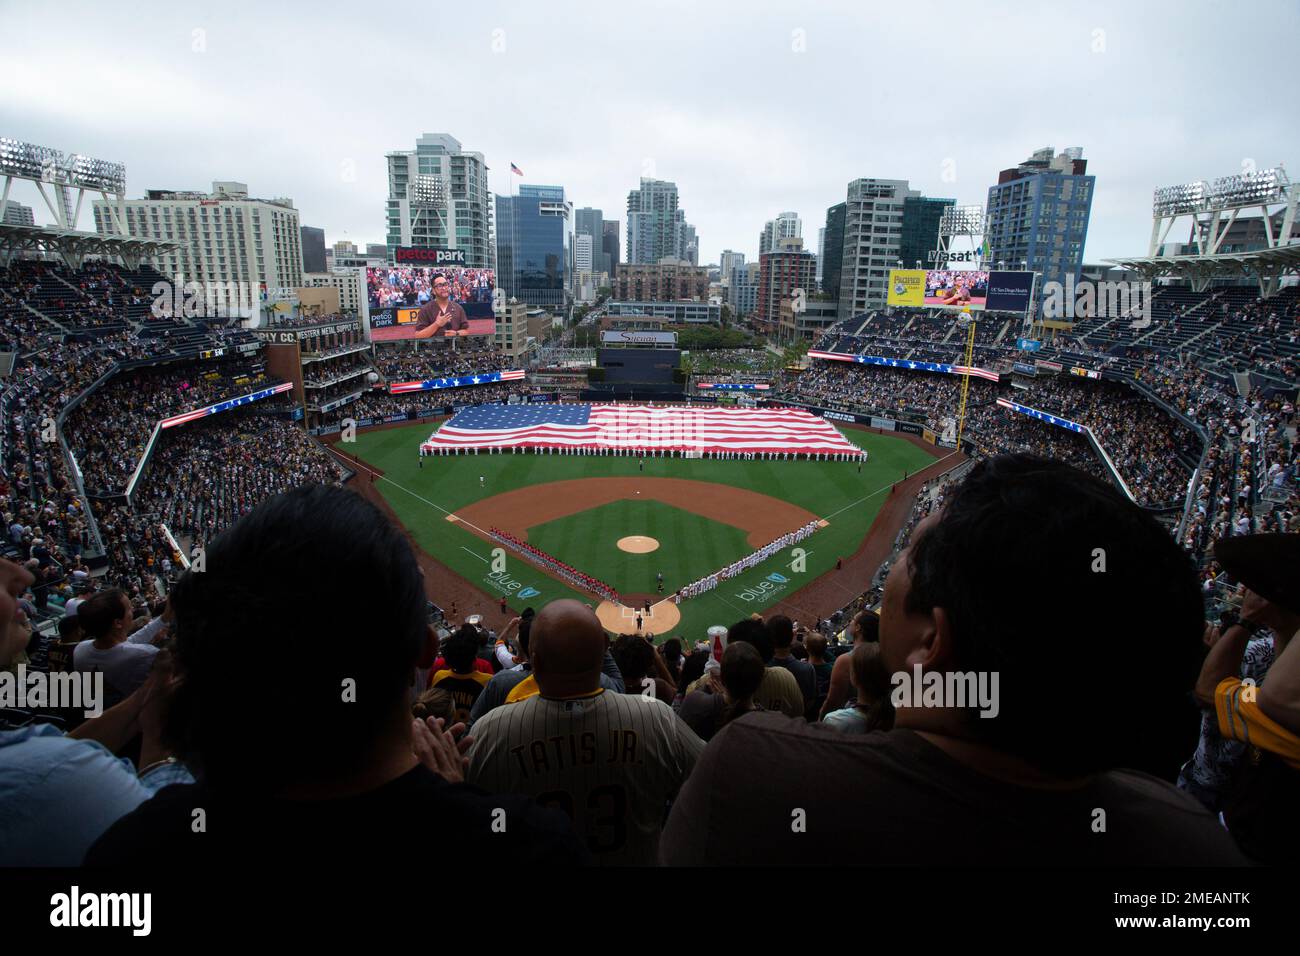 A giant American flag is displayed during the national anthem prior to a baseball game between the San Diego Padres and the Cincinnati Reds Thursday, June 17, 2021, in San Diego. Petco Park opened up for full capacity viewing of a baseball game without masks for the first time since the 2019 season. (AP Photo/Derrick Tuskan) Banque D'Images